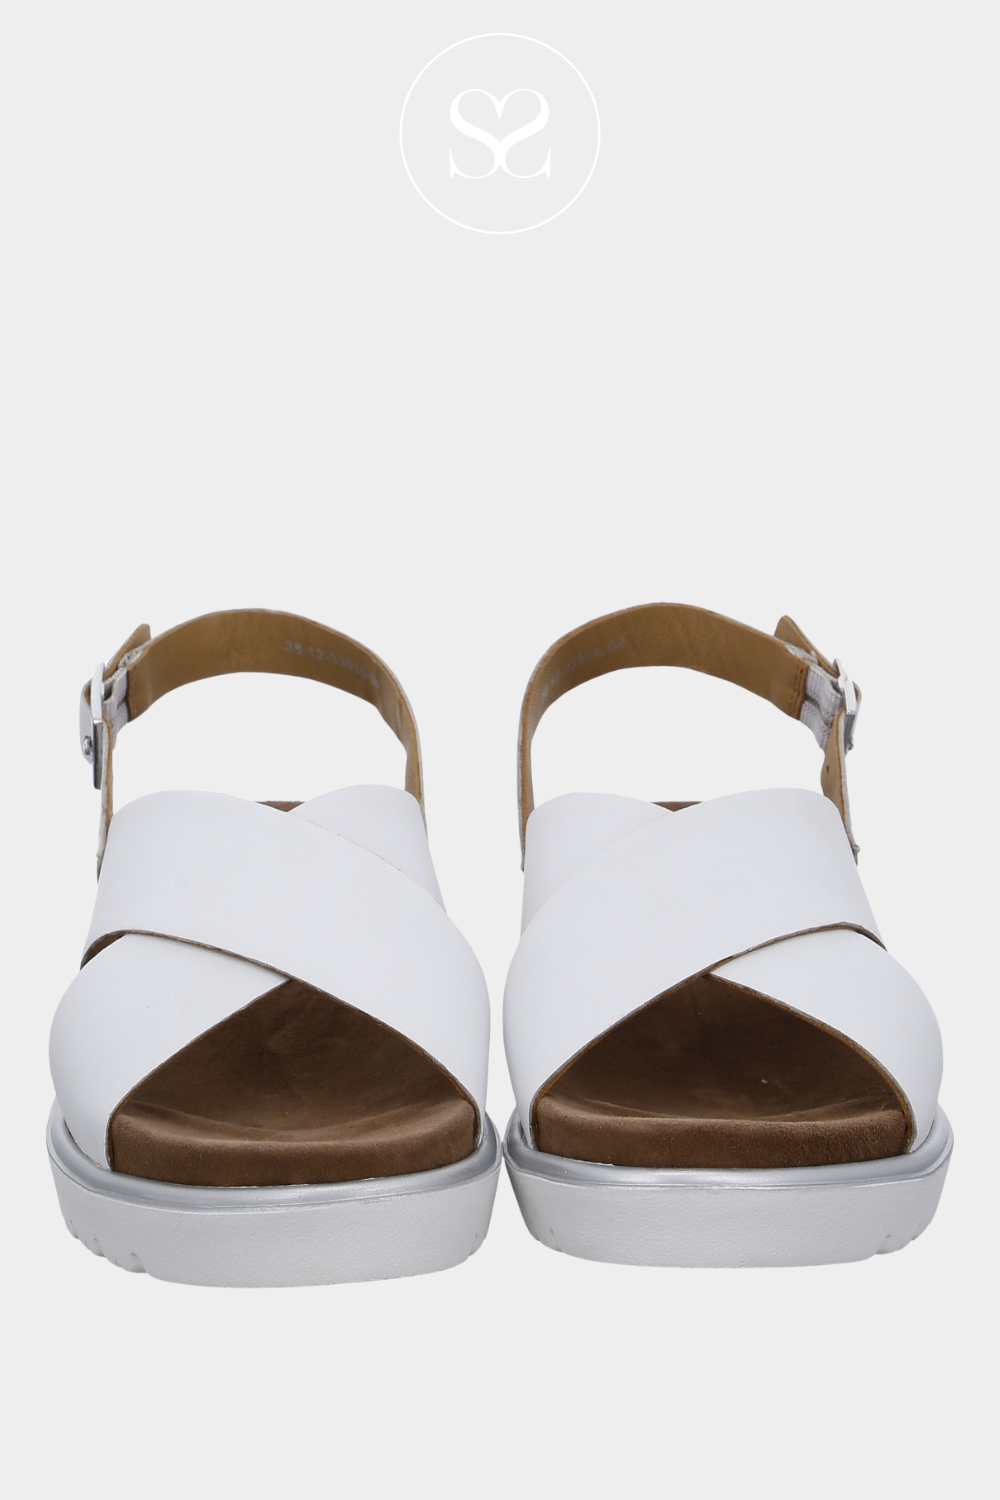 ARA 12-33516 WHITE LEATHER WEDGE CRISS CROSS SANDALS WITH ADJUSTABLE SLINGBACK STRAP